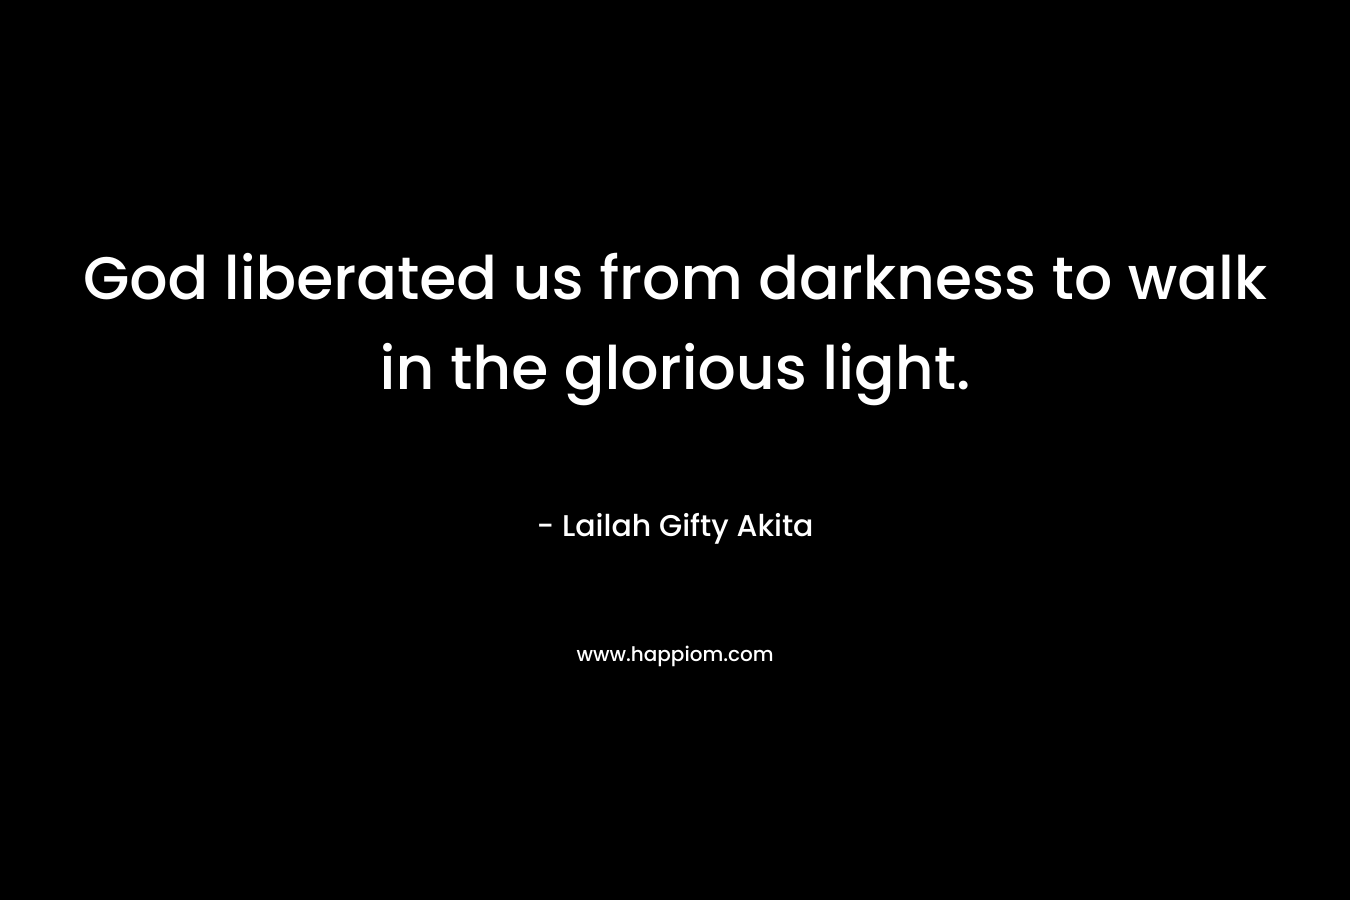 God liberated us from darkness to walk in the glorious light. – Lailah Gifty Akita